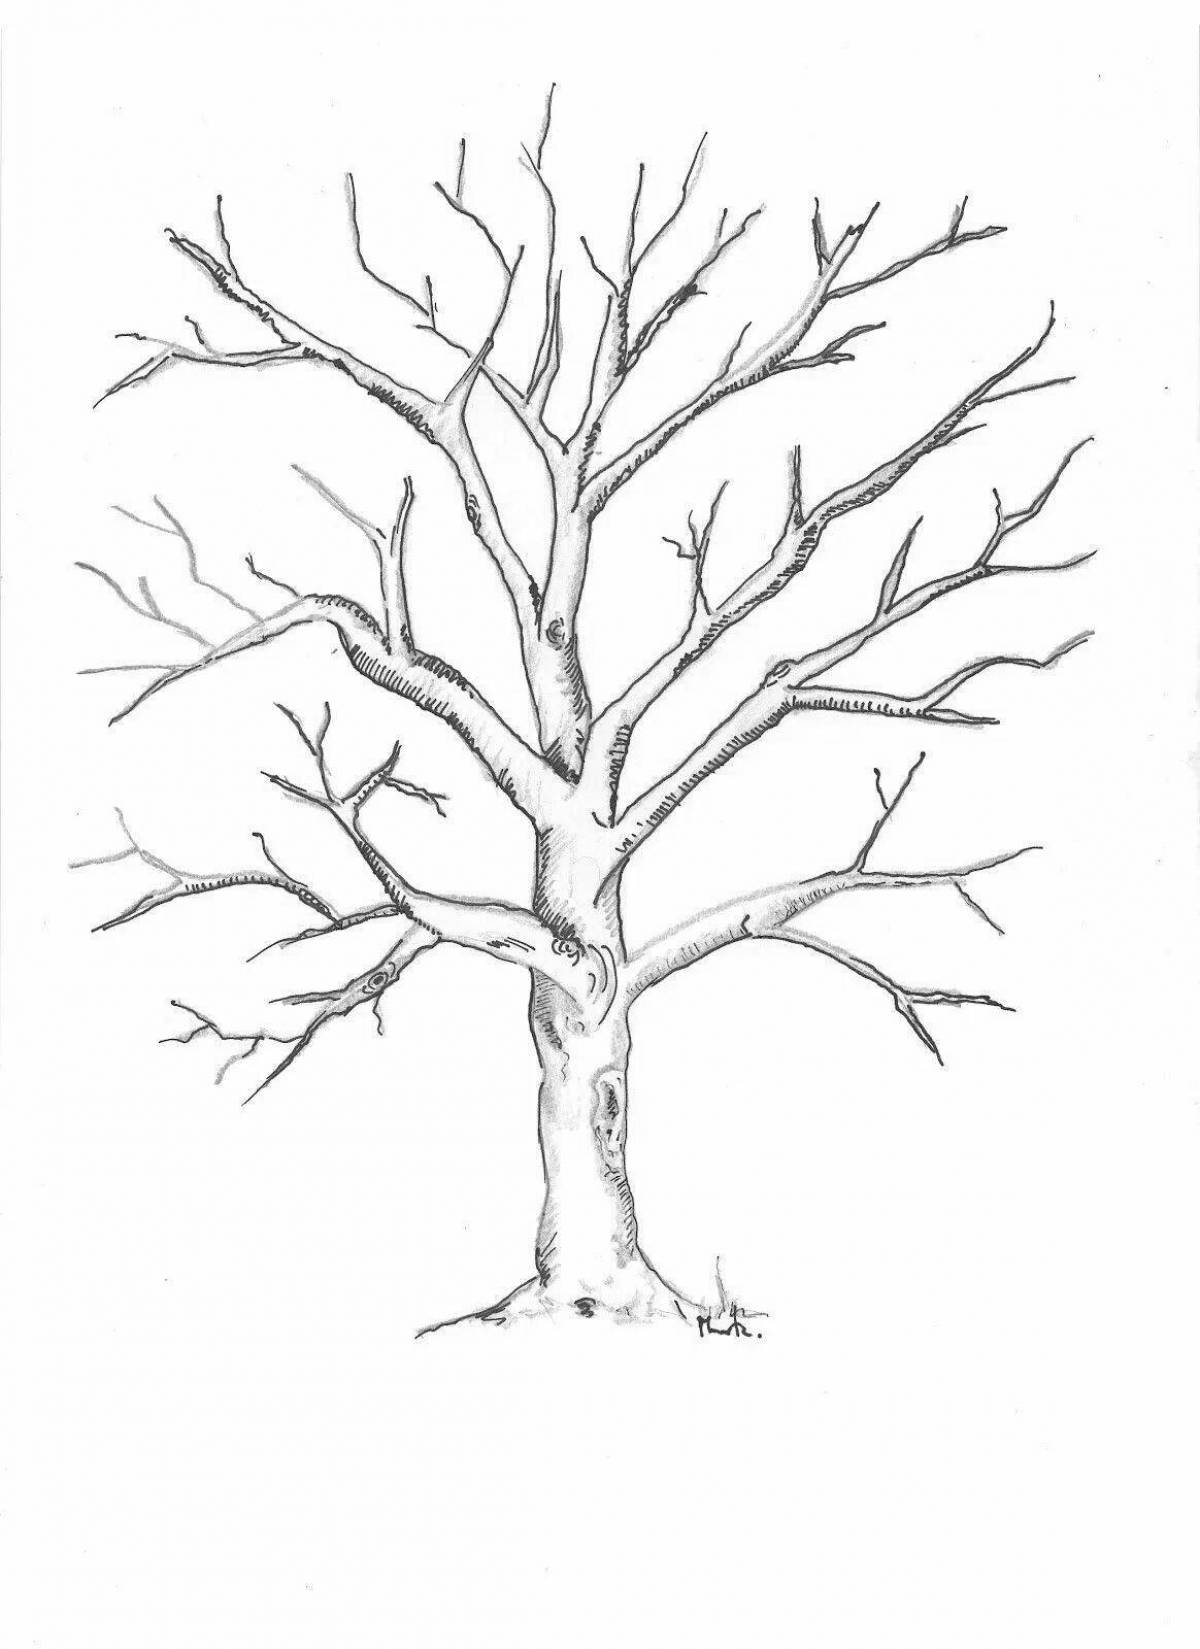 A witty drawing of a sprawling tree